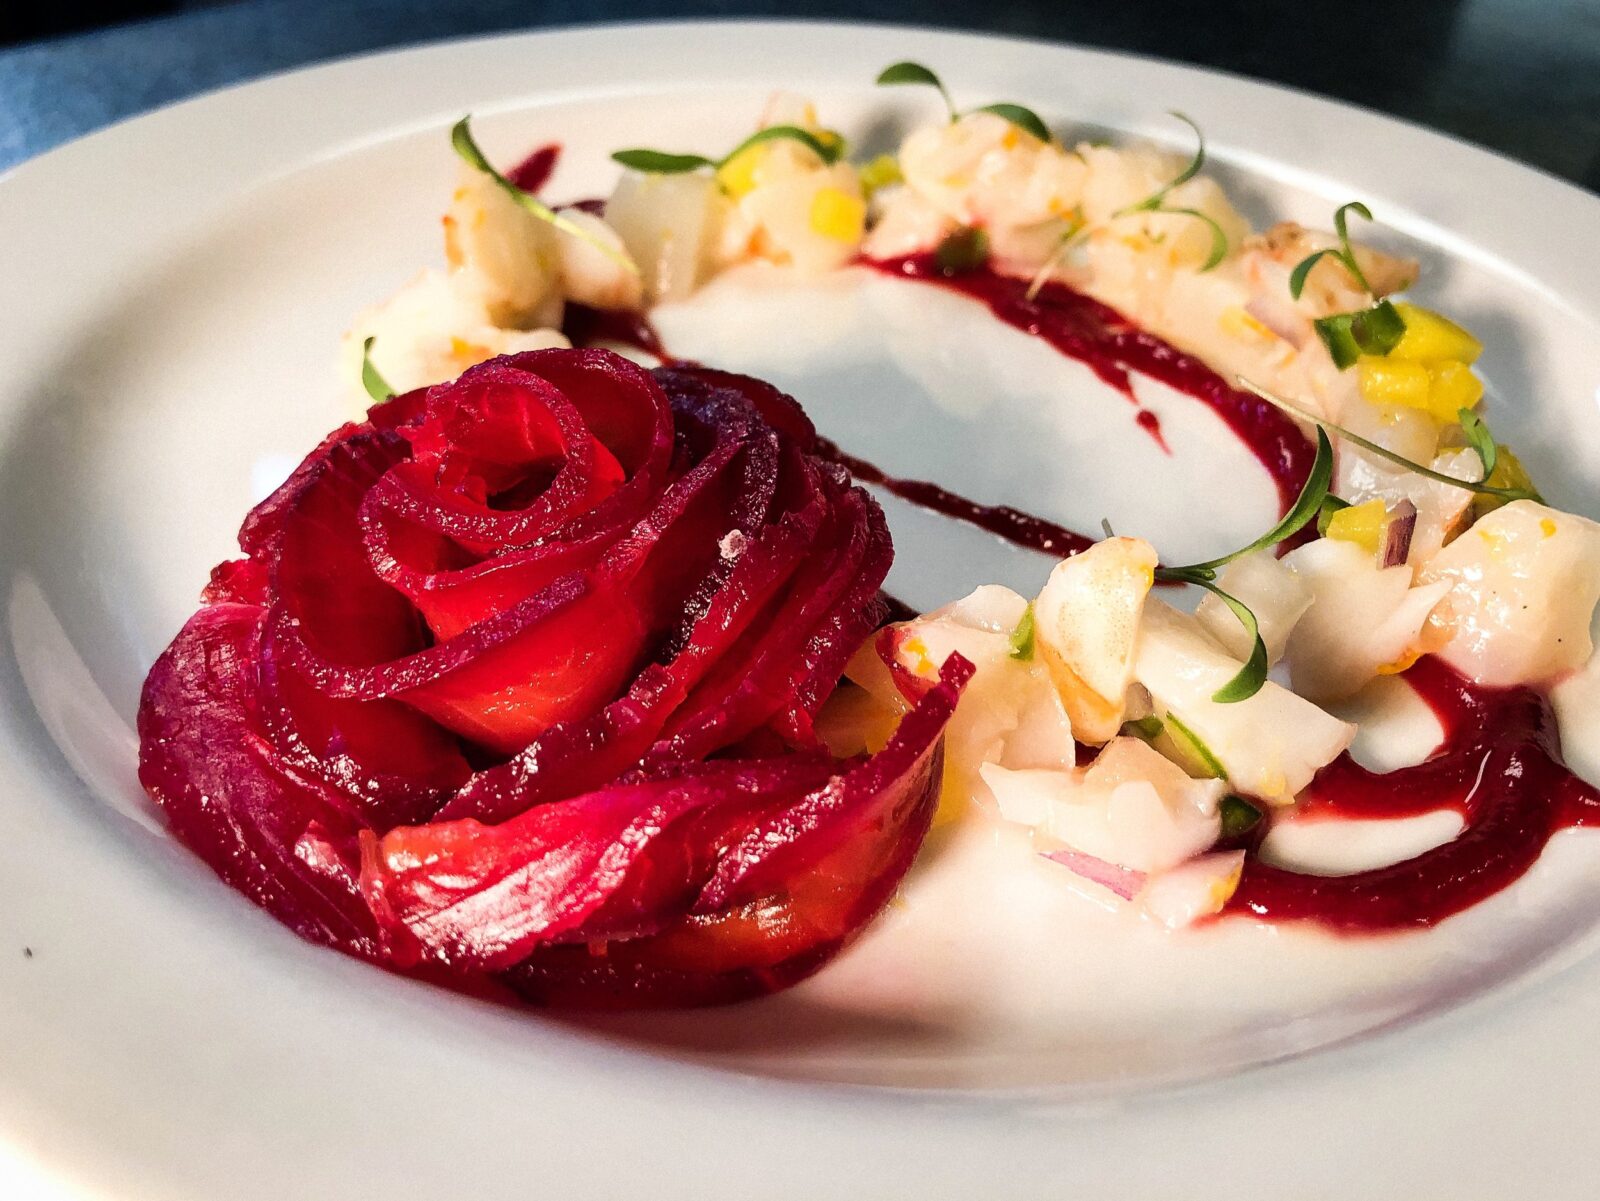 pickled beets in a rosette